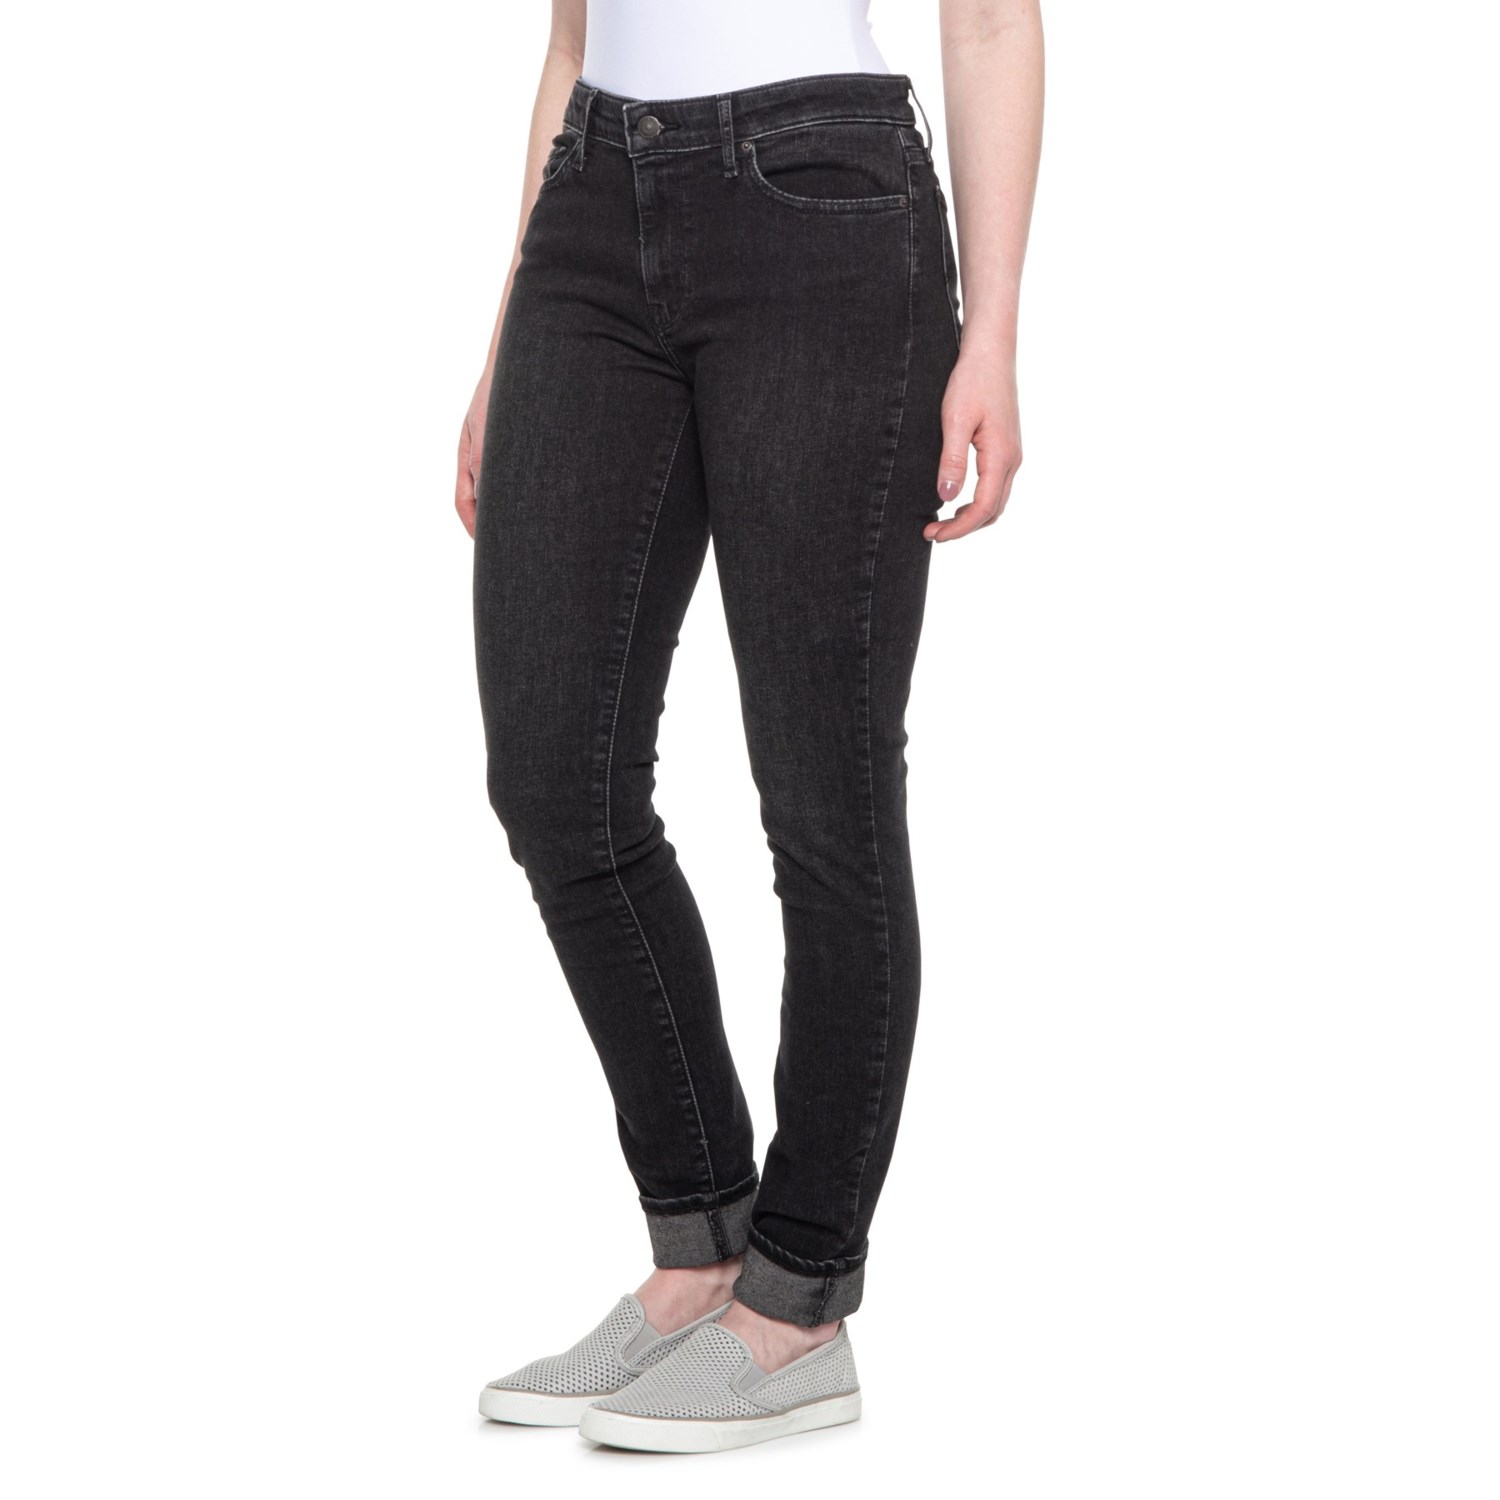 Levis 711 Skinny Jeans - Mid Rise (For Women)